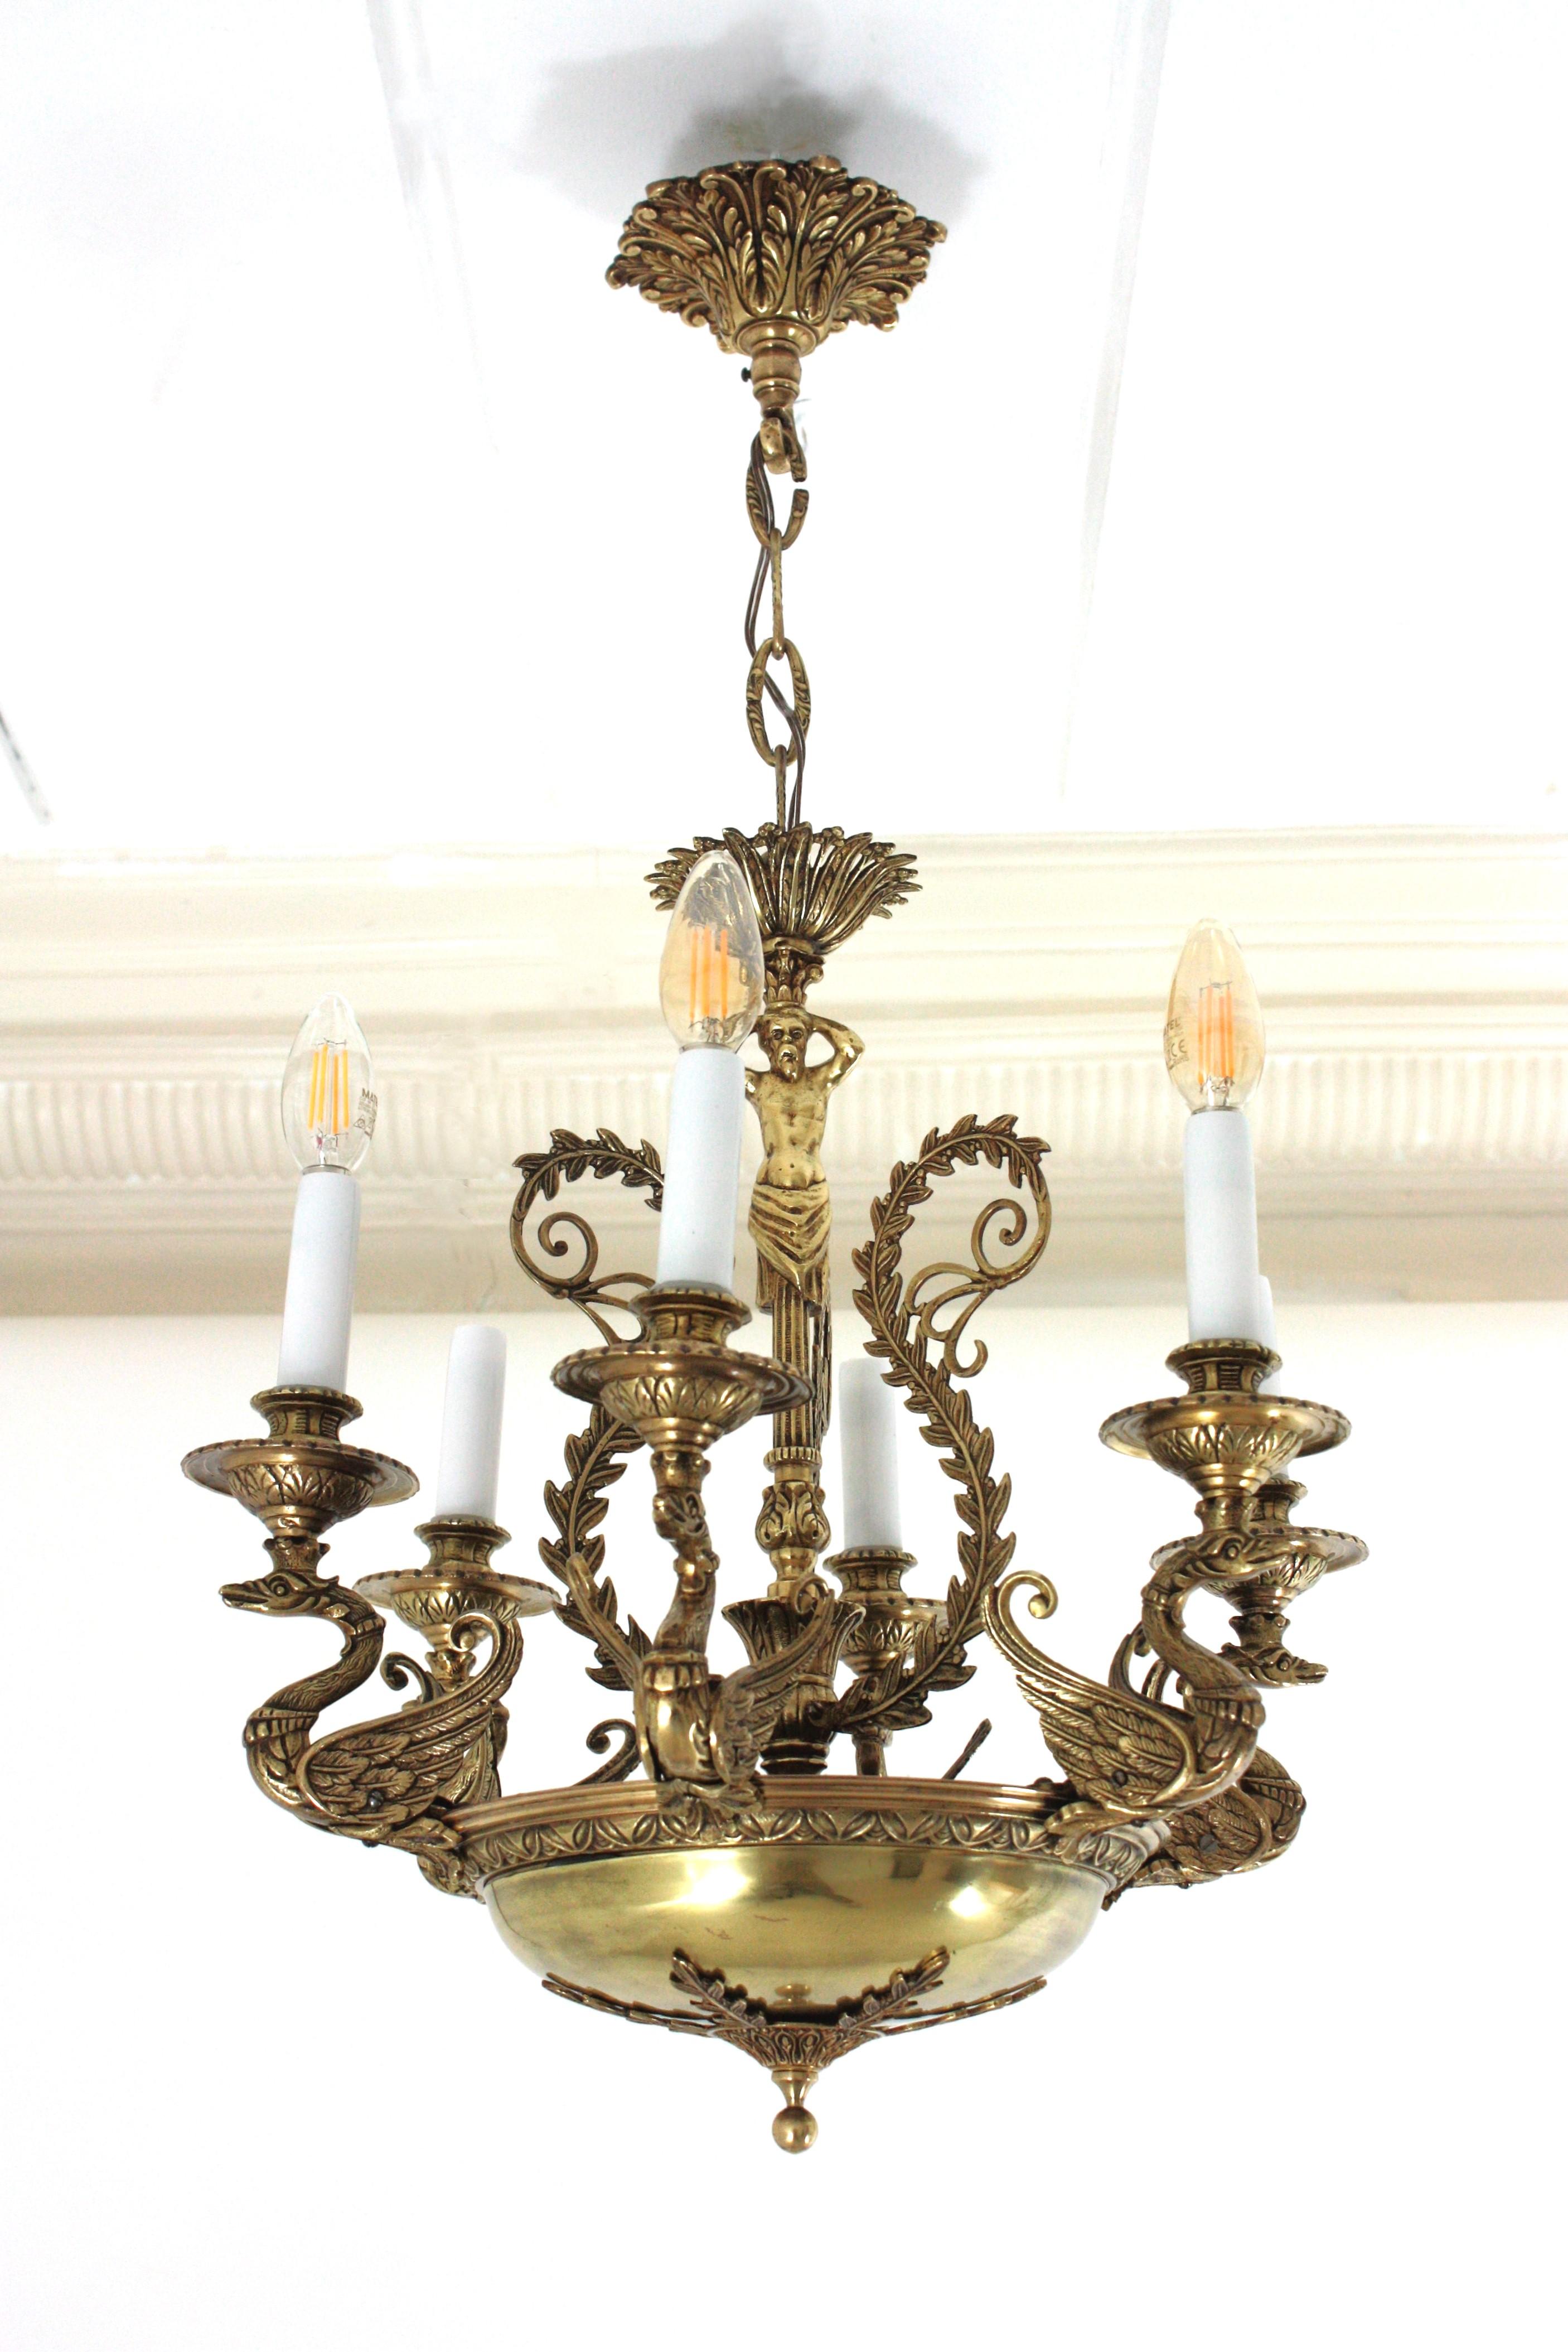 20th Century French Empire Bronze Figural Swan Chandelier For Sale